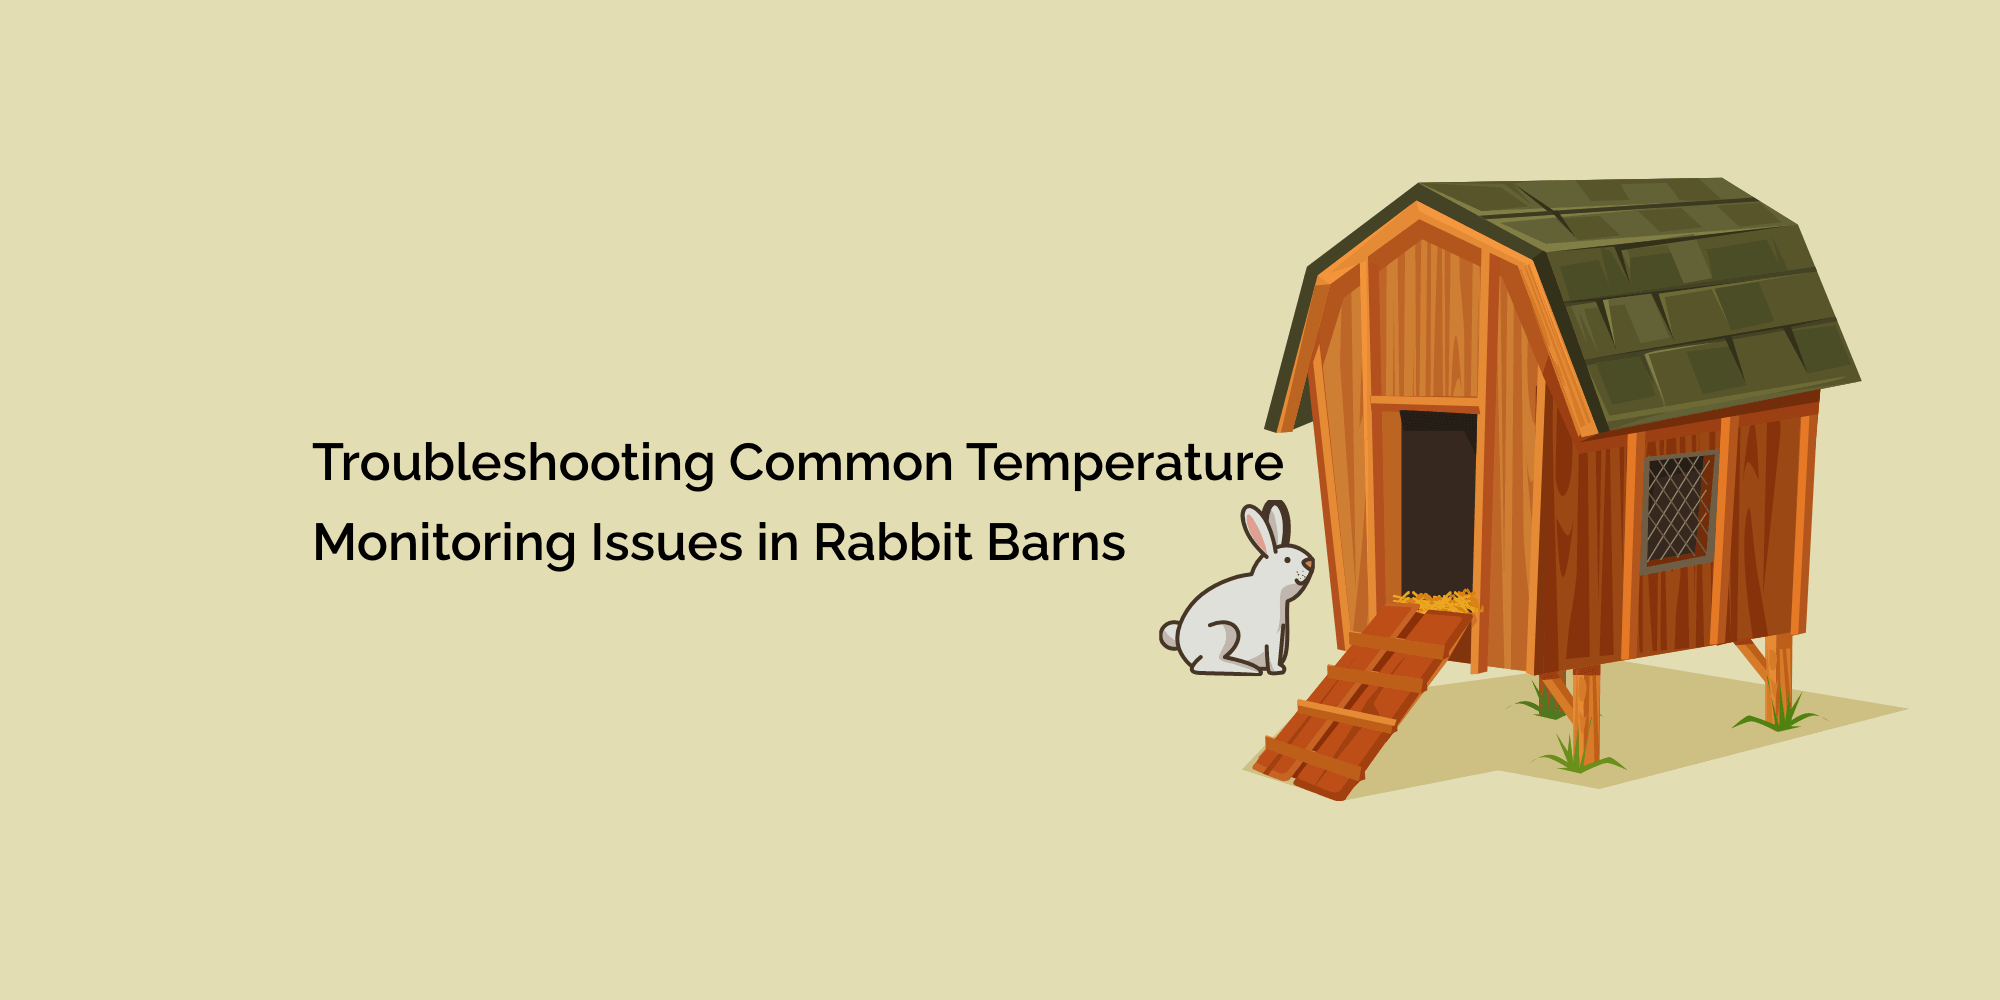 Troubleshooting Common Temperature Monitoring Issues in Rabbit Barns